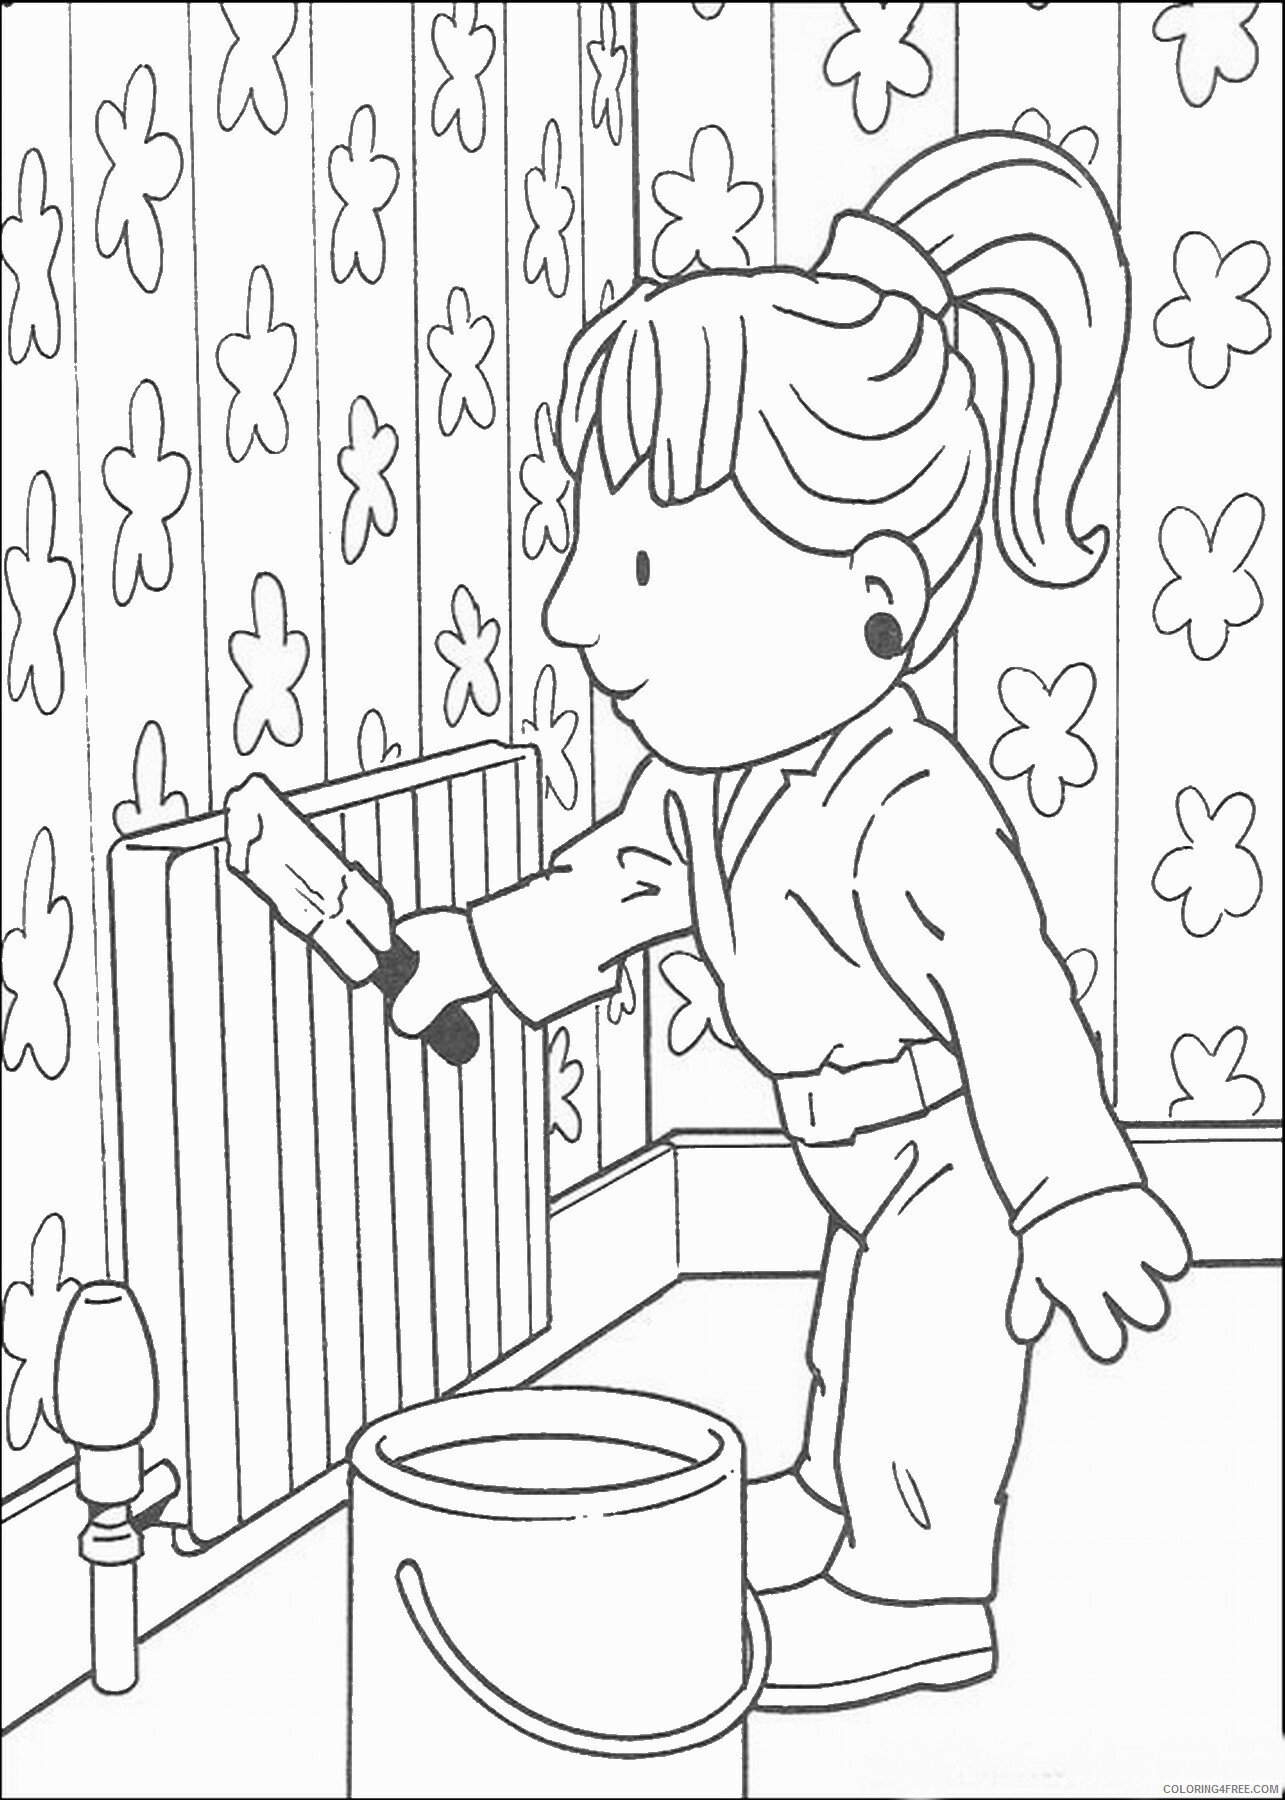 Bob the Builder Coloring Pages TV Film bob the builder_14 Printable 2020 00964 Coloring4free